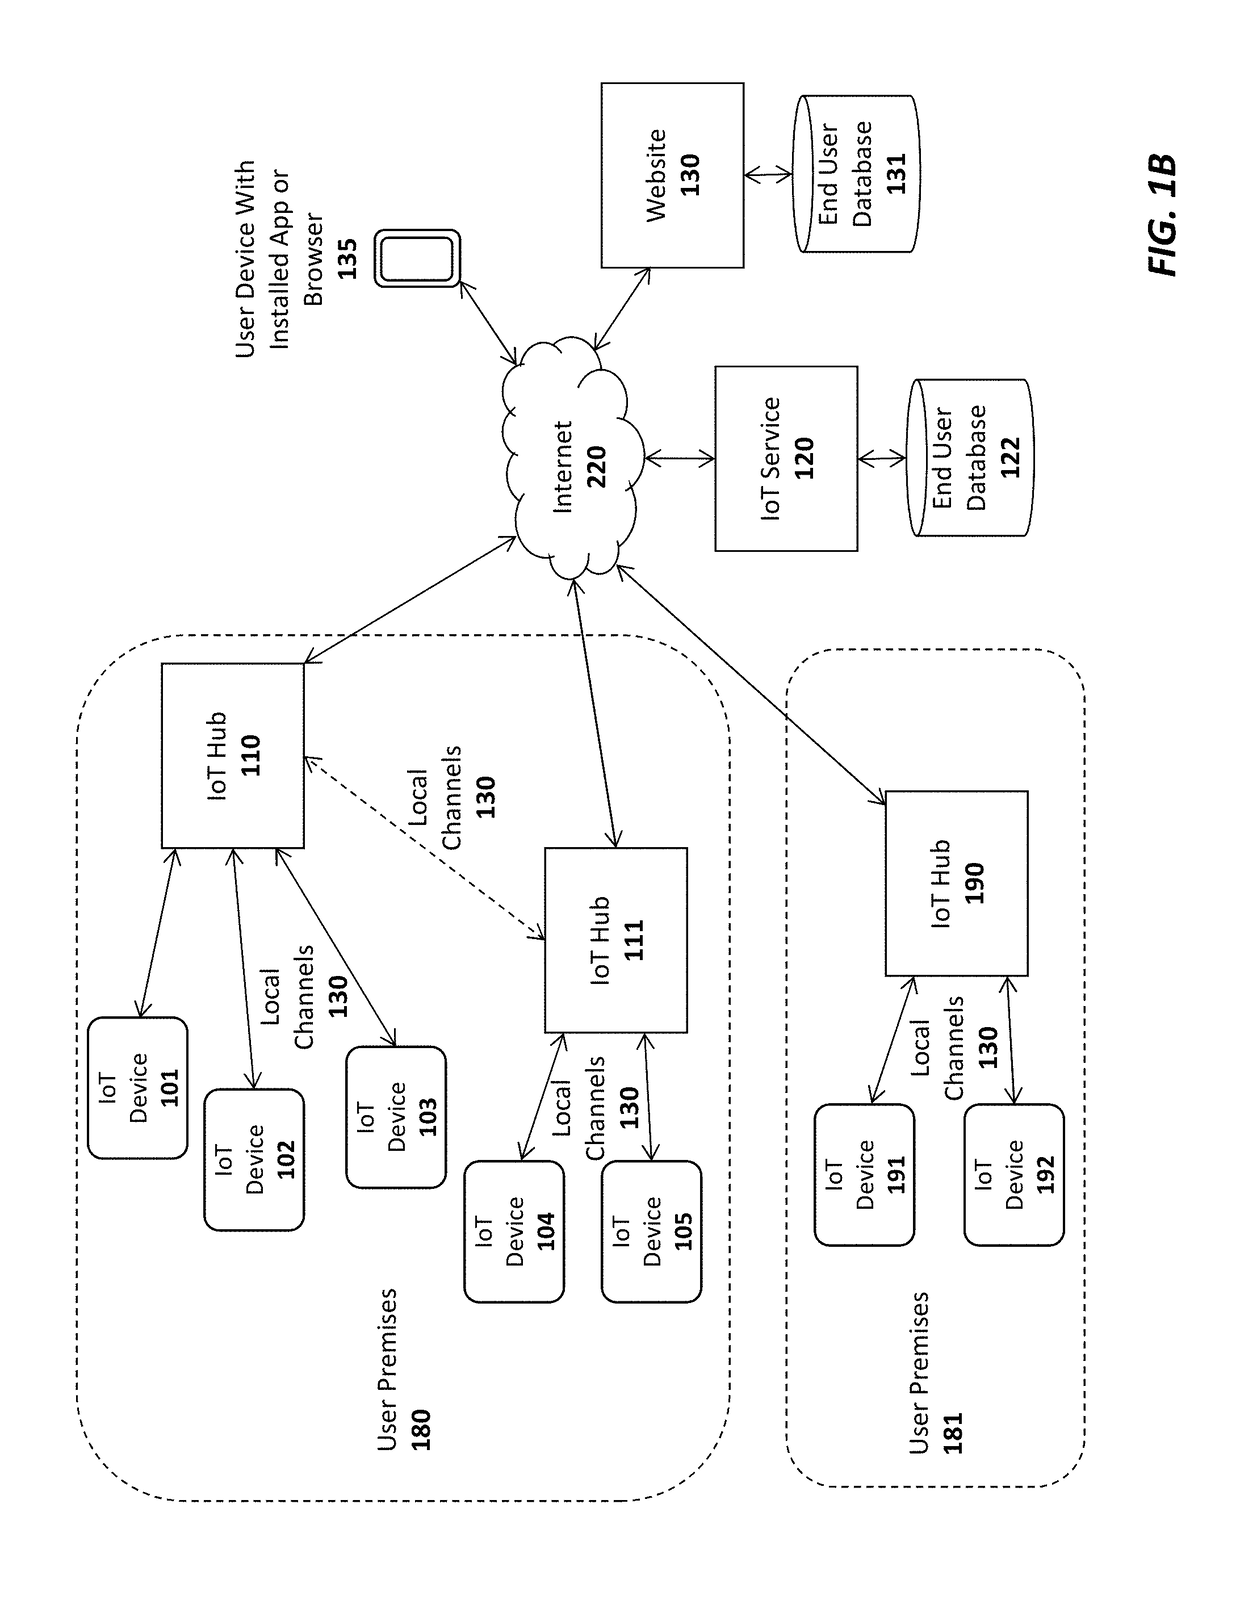 Embedded internet of things (IOT) hub for integration with an appliance and associated systems and methods